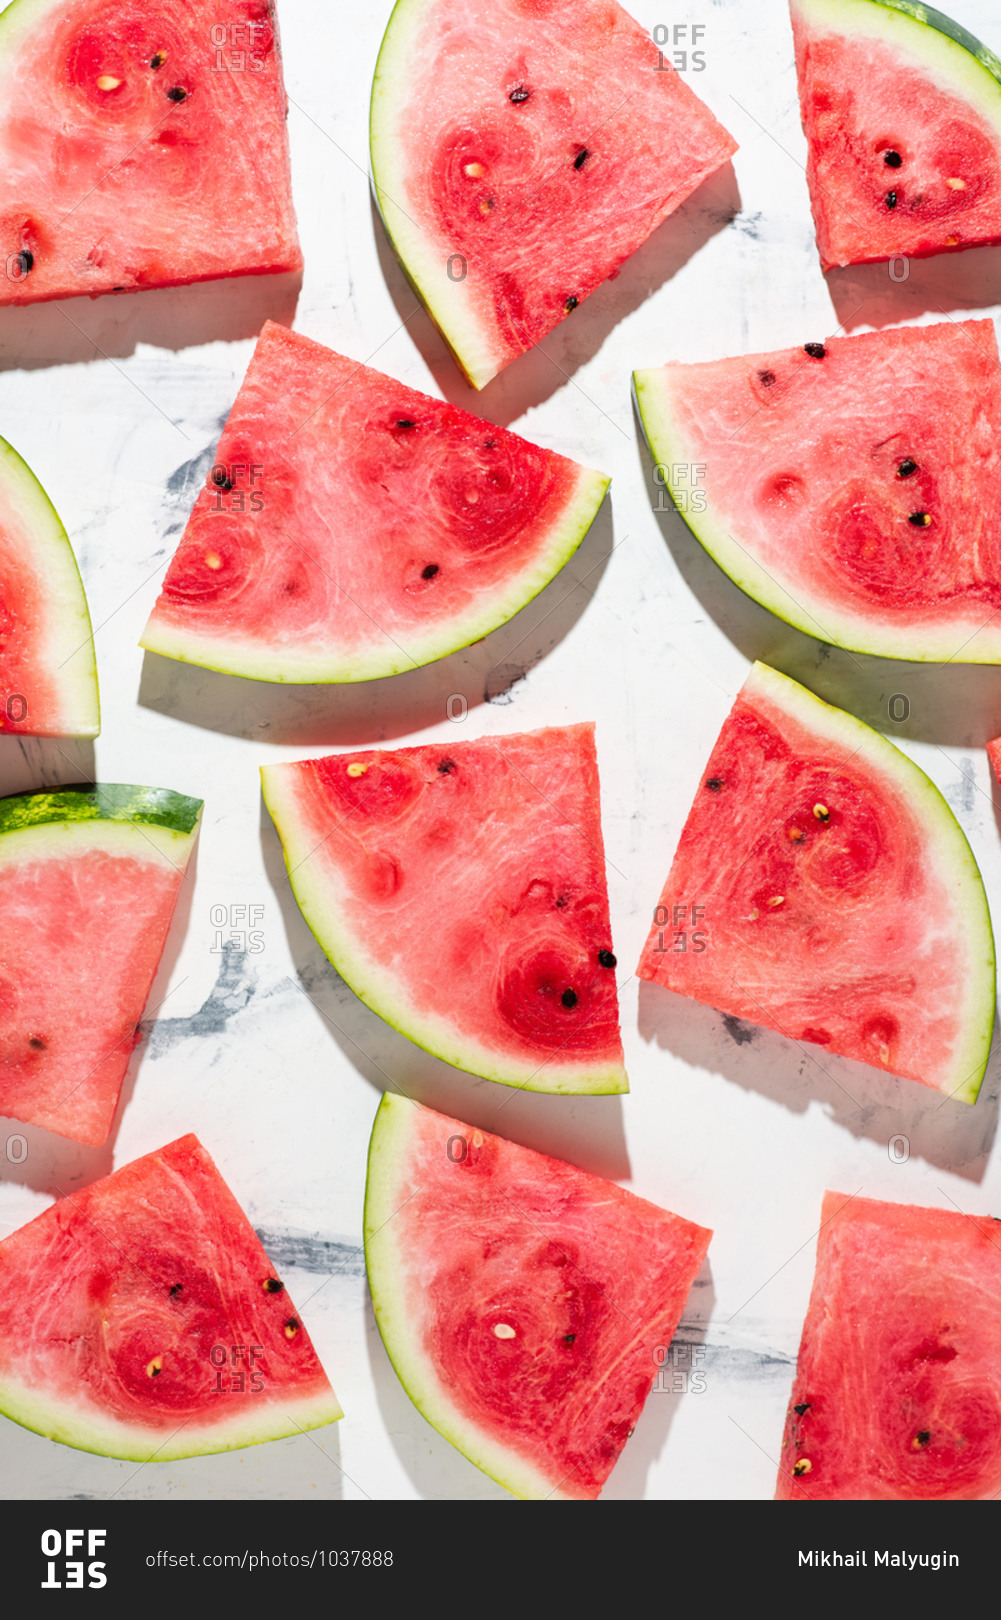 Overhead view of sliced watermelon served on white background